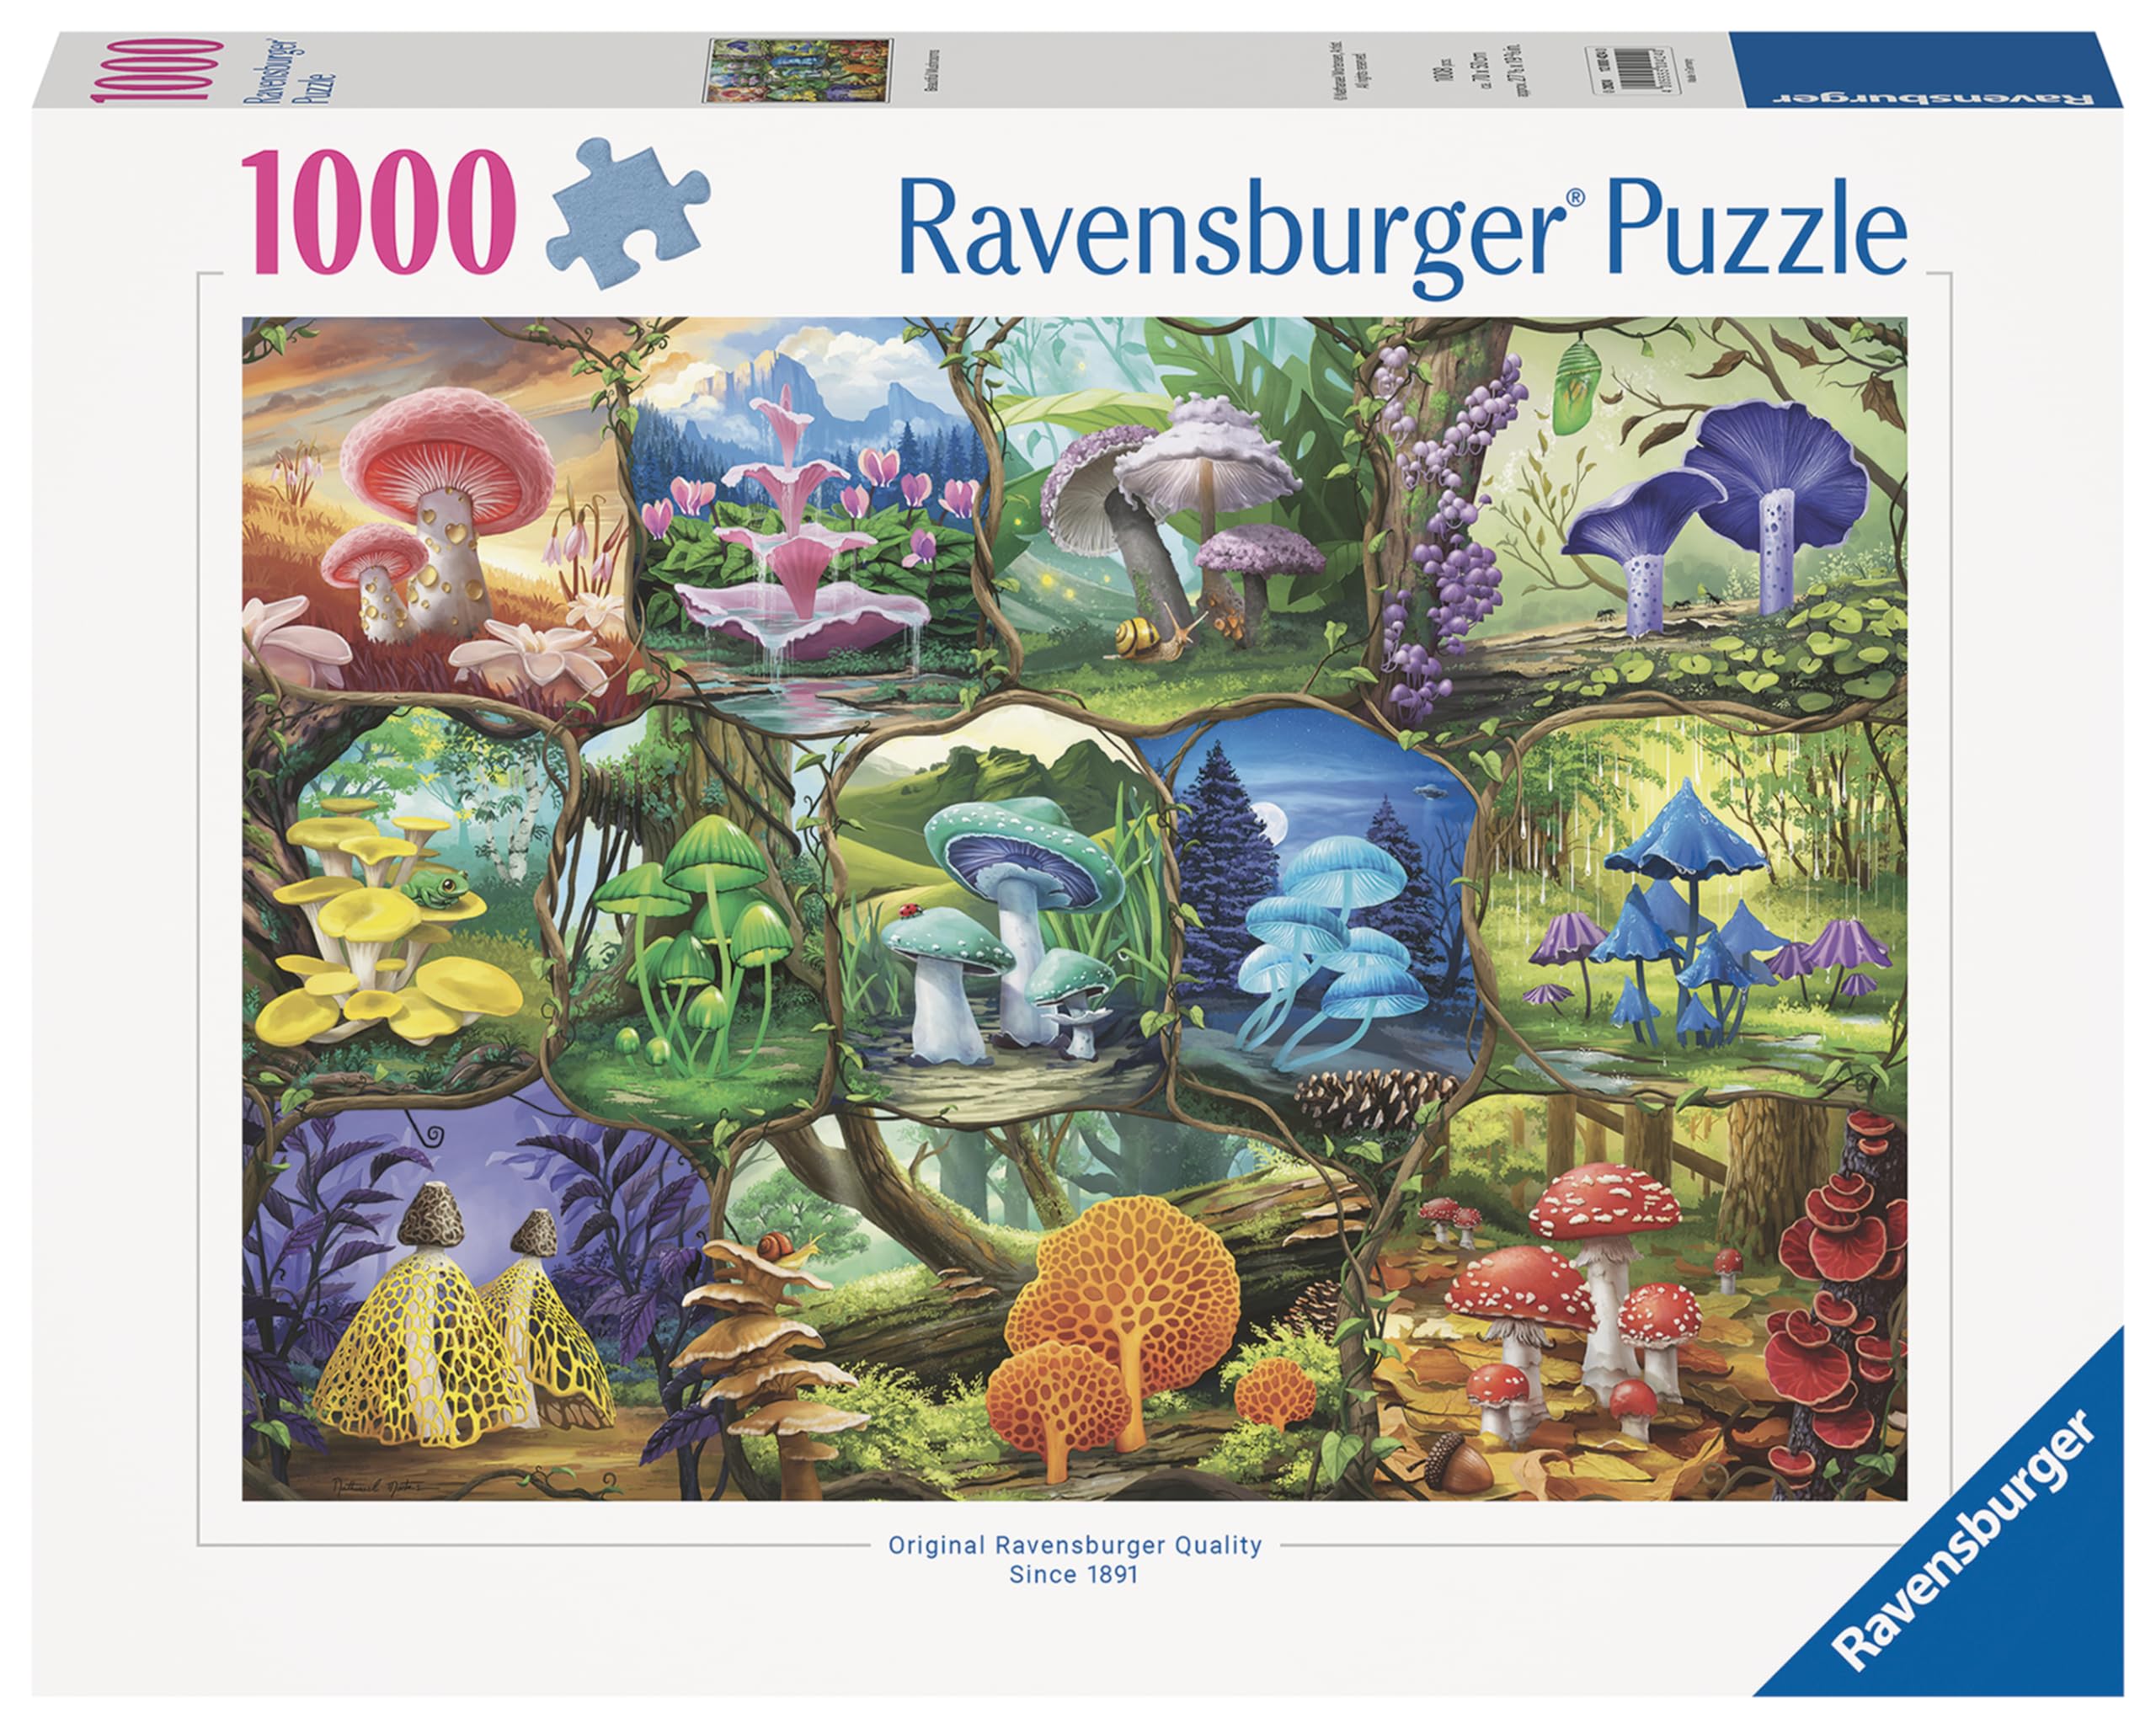 Ravensburger Beautiful Mushrooms 1000 Piece Jigsaw Puzzle for Adults - 12000424 - Handcrafted Tooling, Made in Germany, Every Piece Fits Together Perfectly